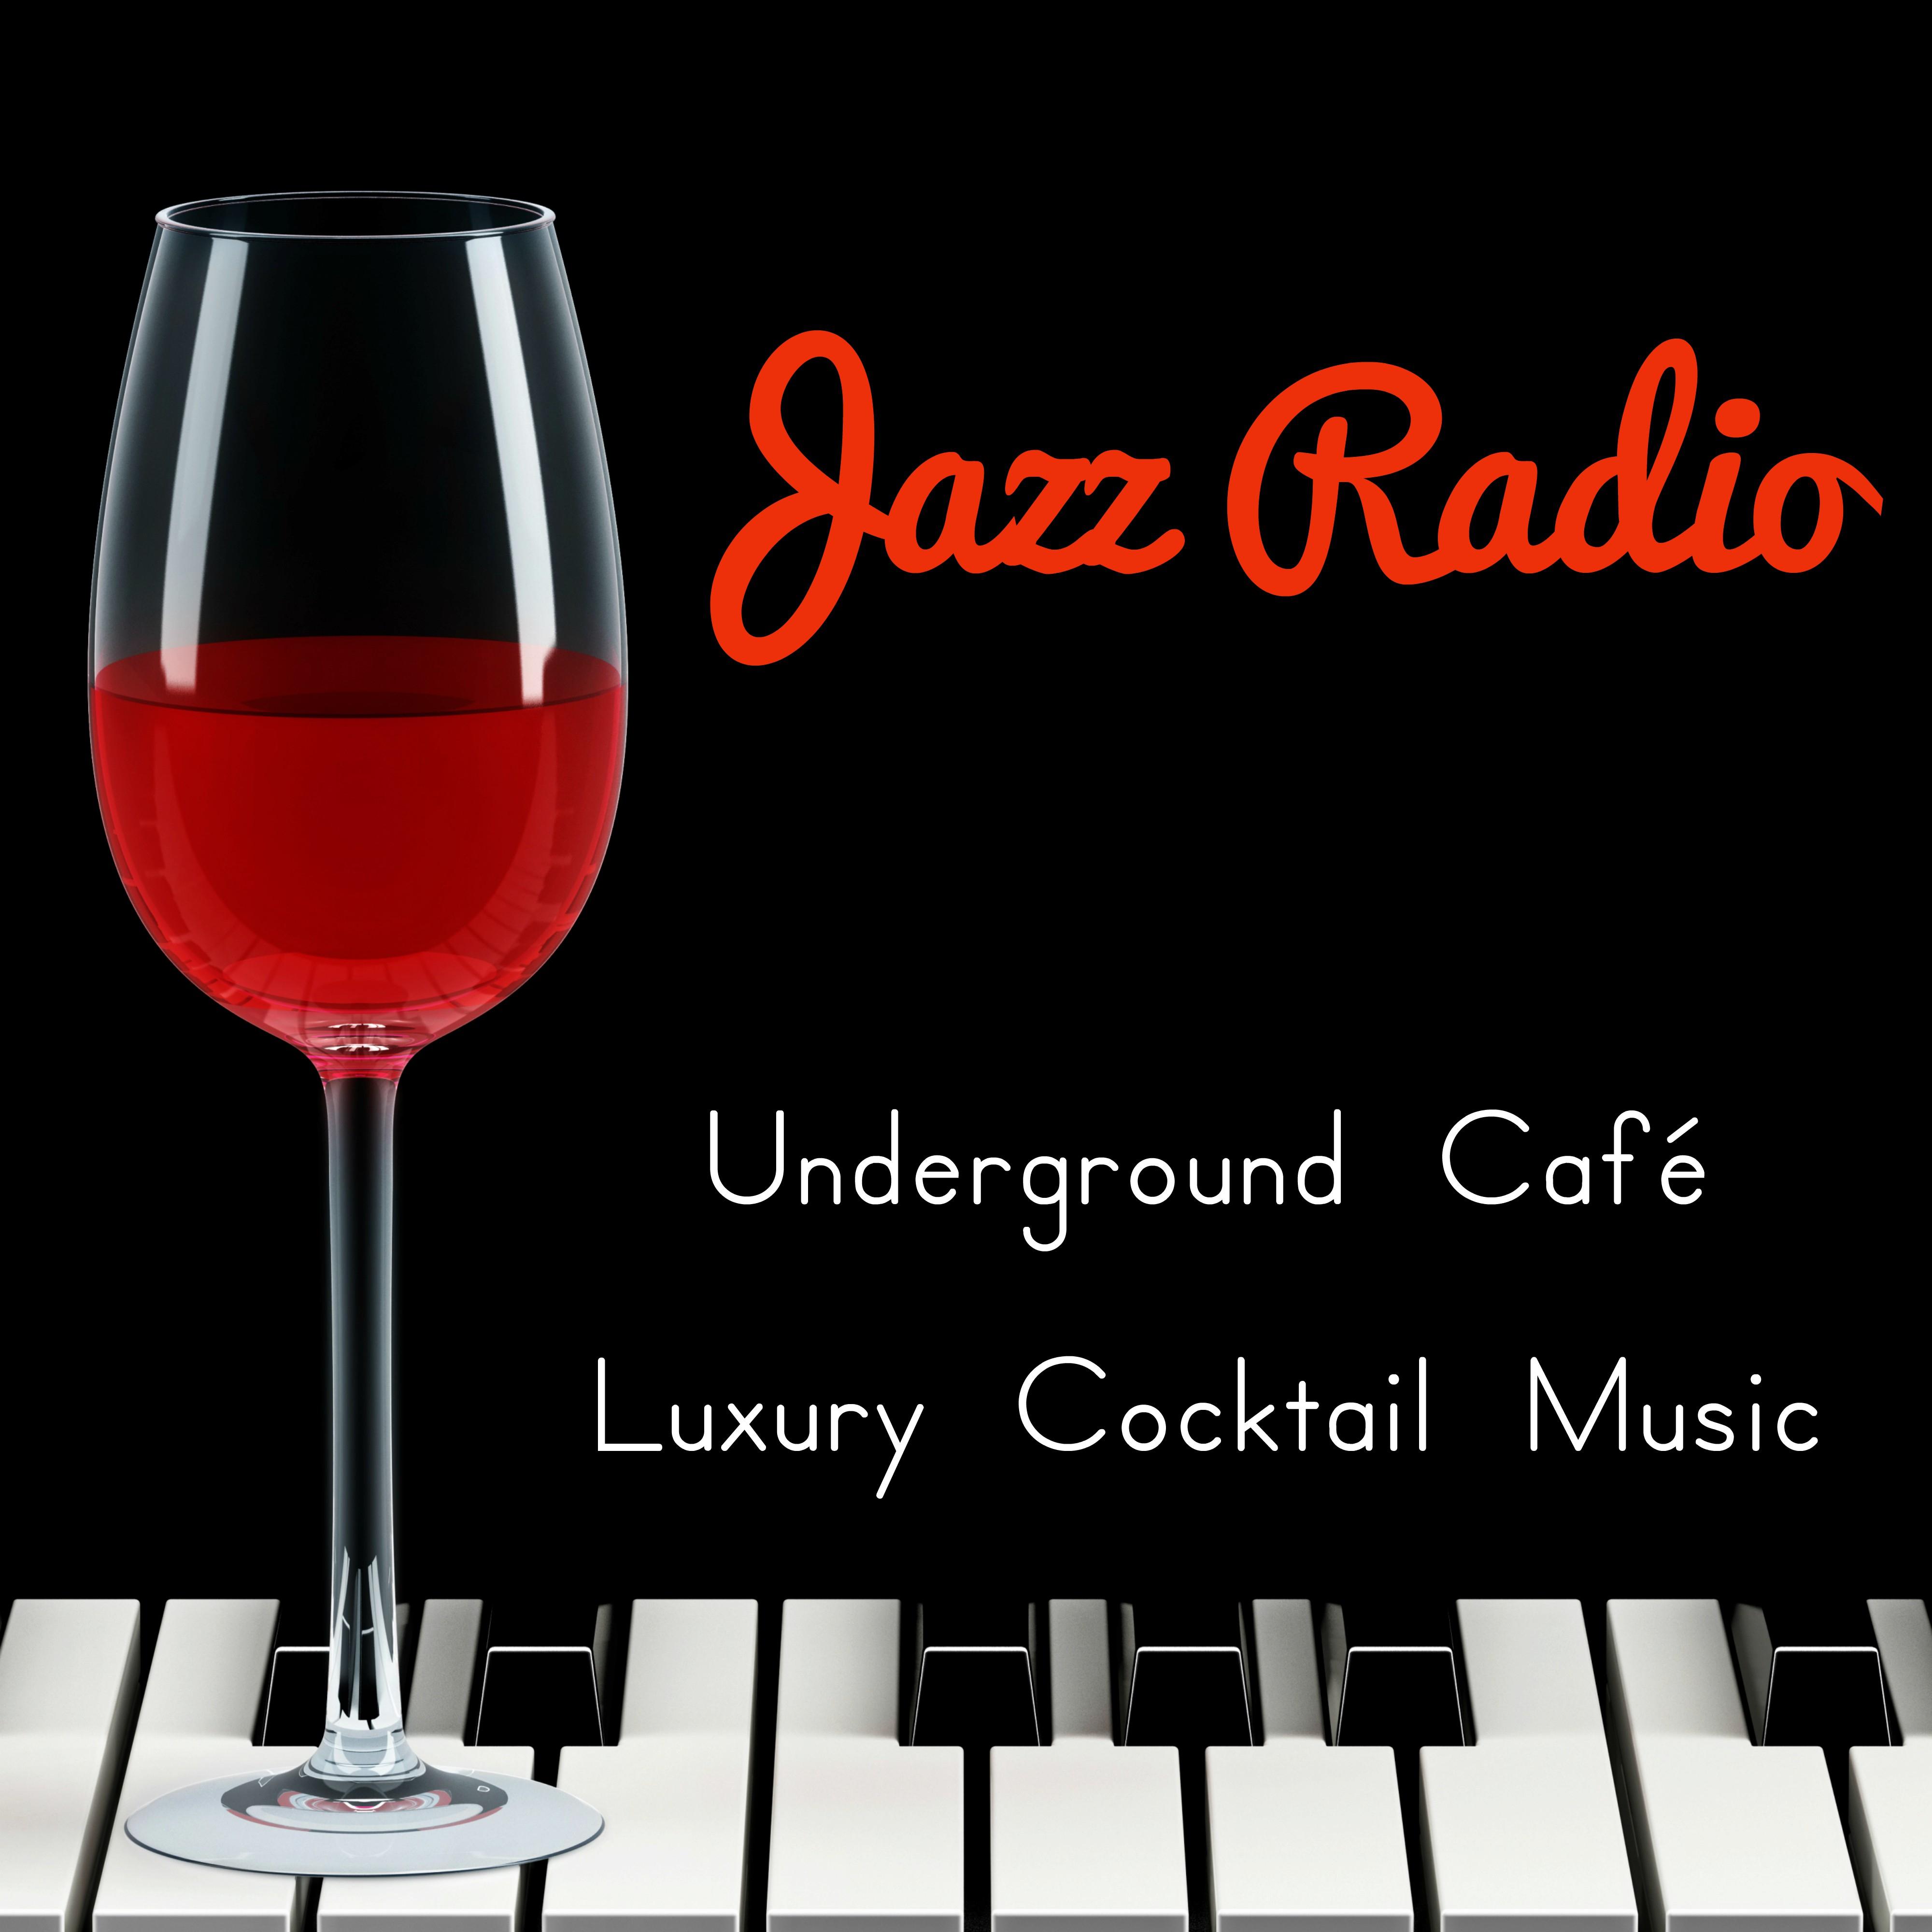 Jazz Radio - Underground Café Luxury Cocktail Music to Relax with Jazz Lounge Chillout Sounds